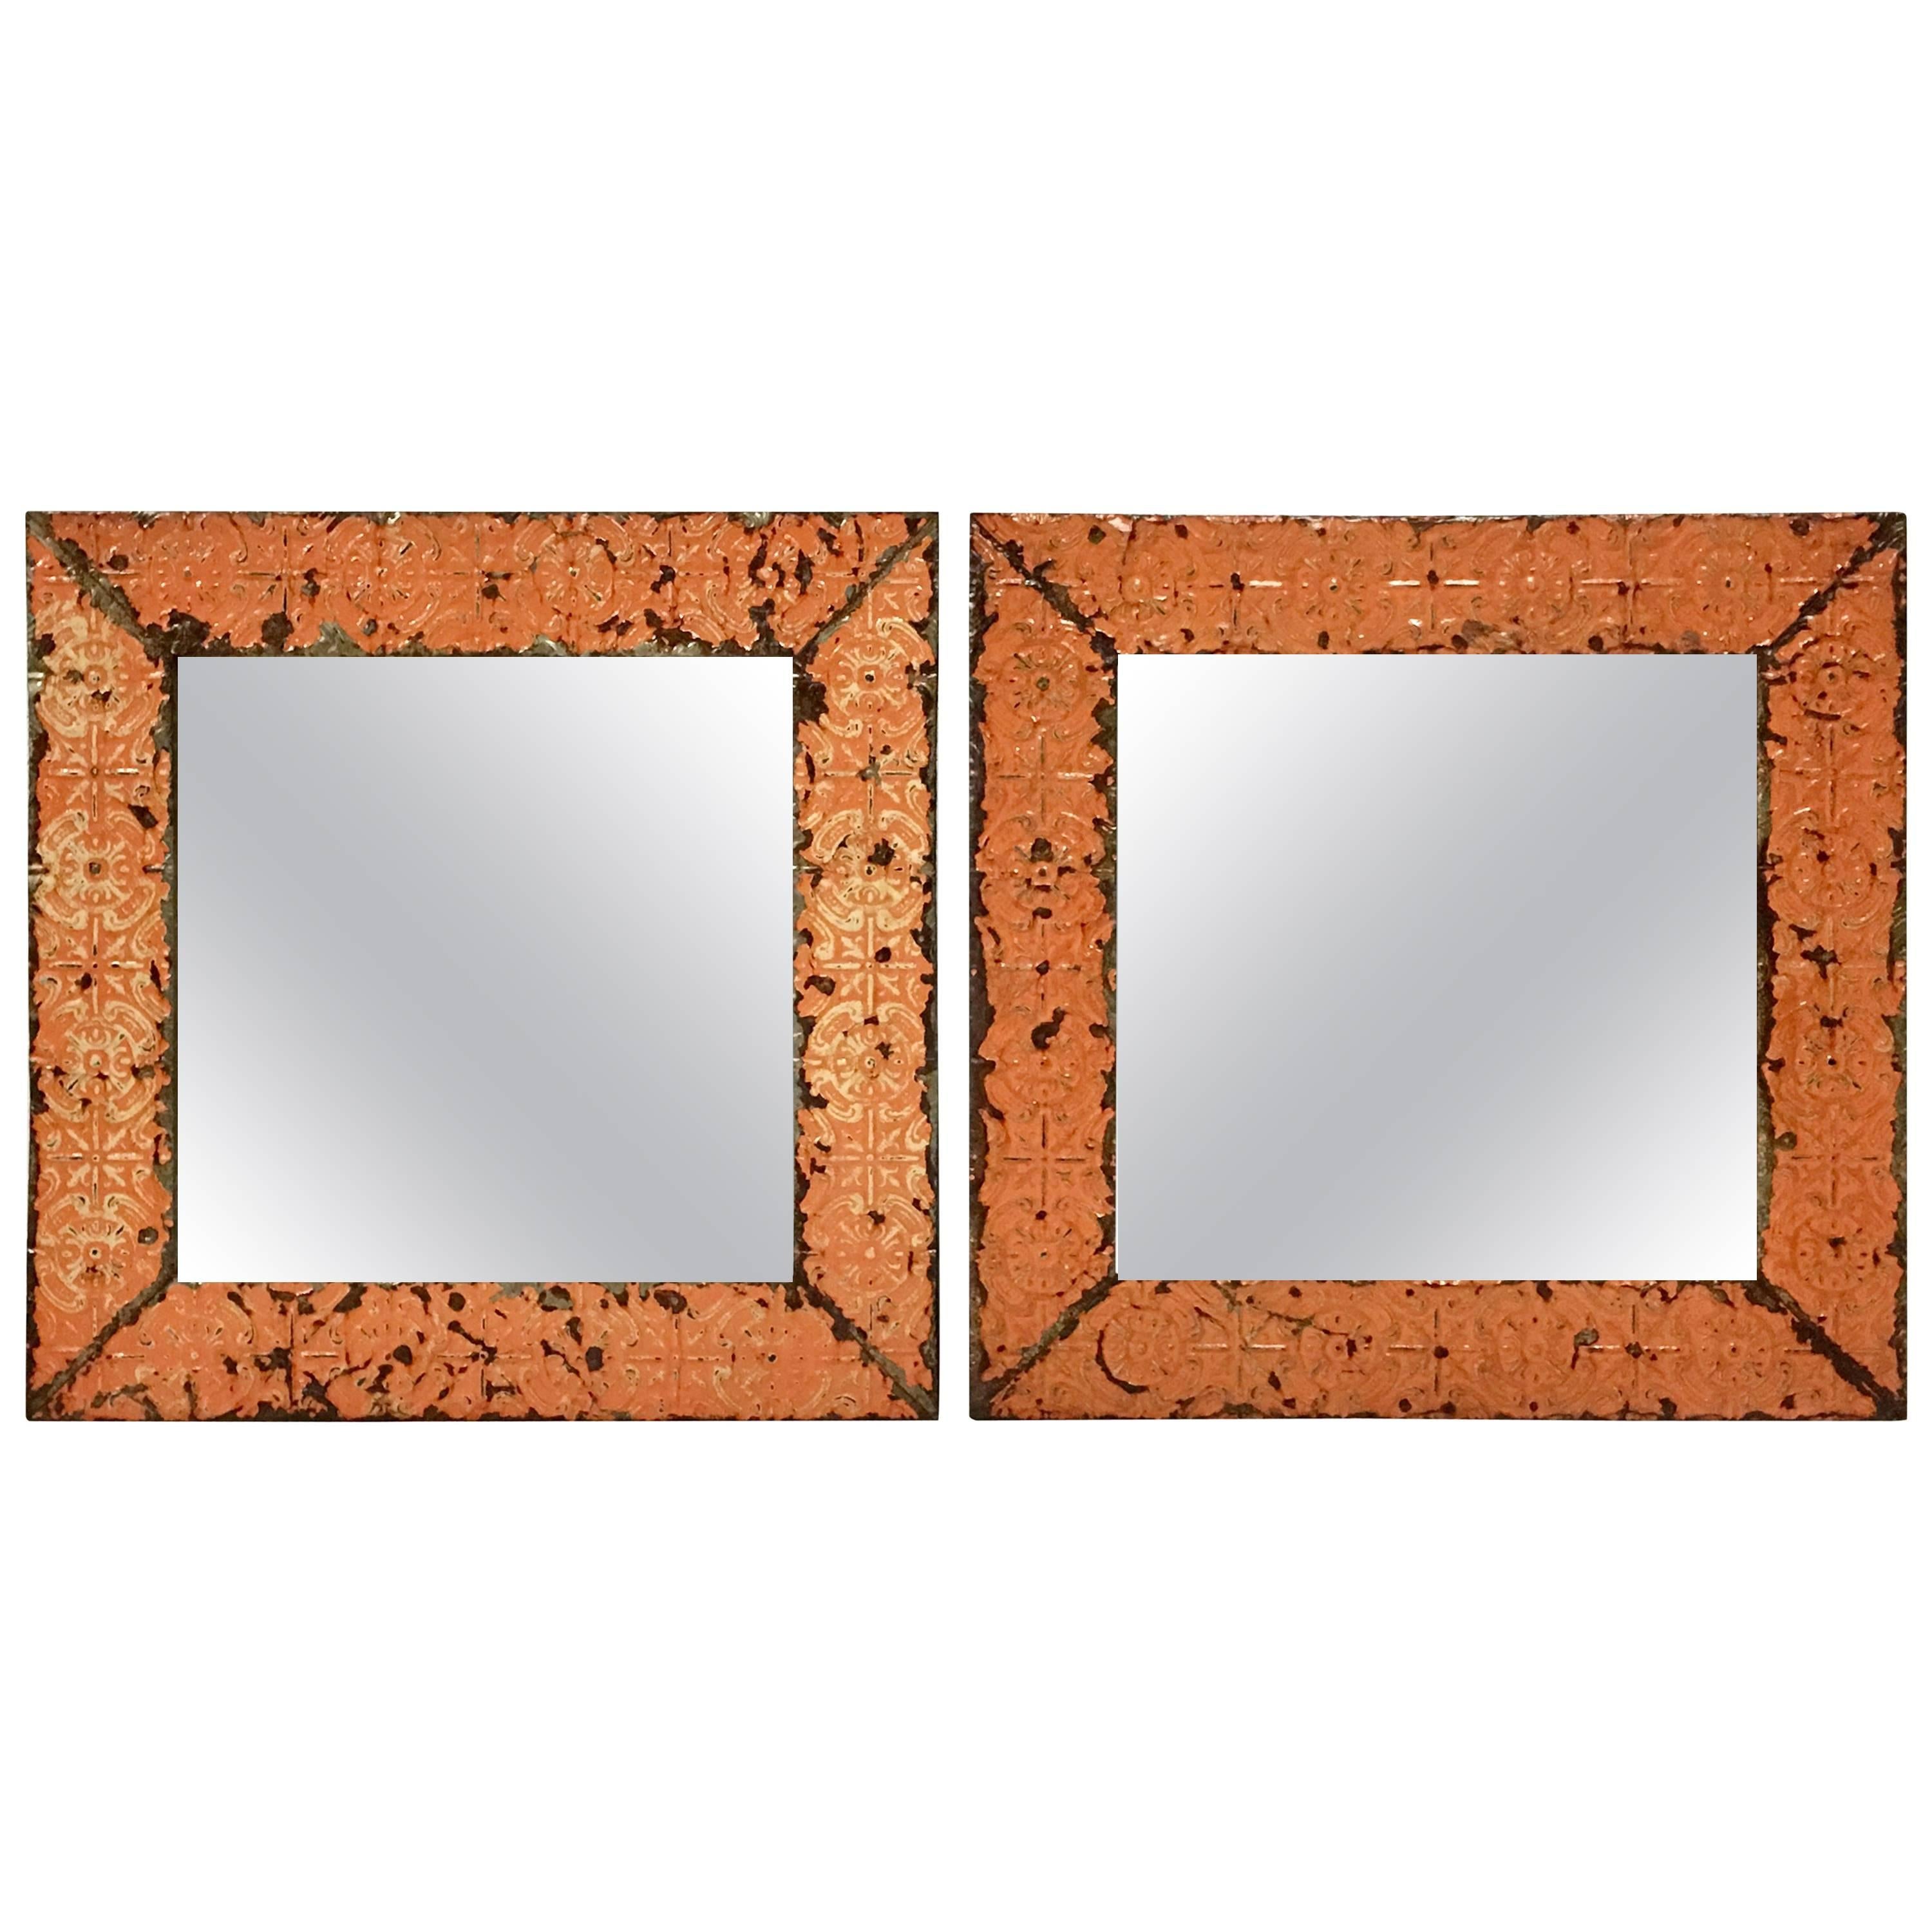 A Pair Of Antique Copper Ceiling Tile Framed Mirrors-New York City For Sale